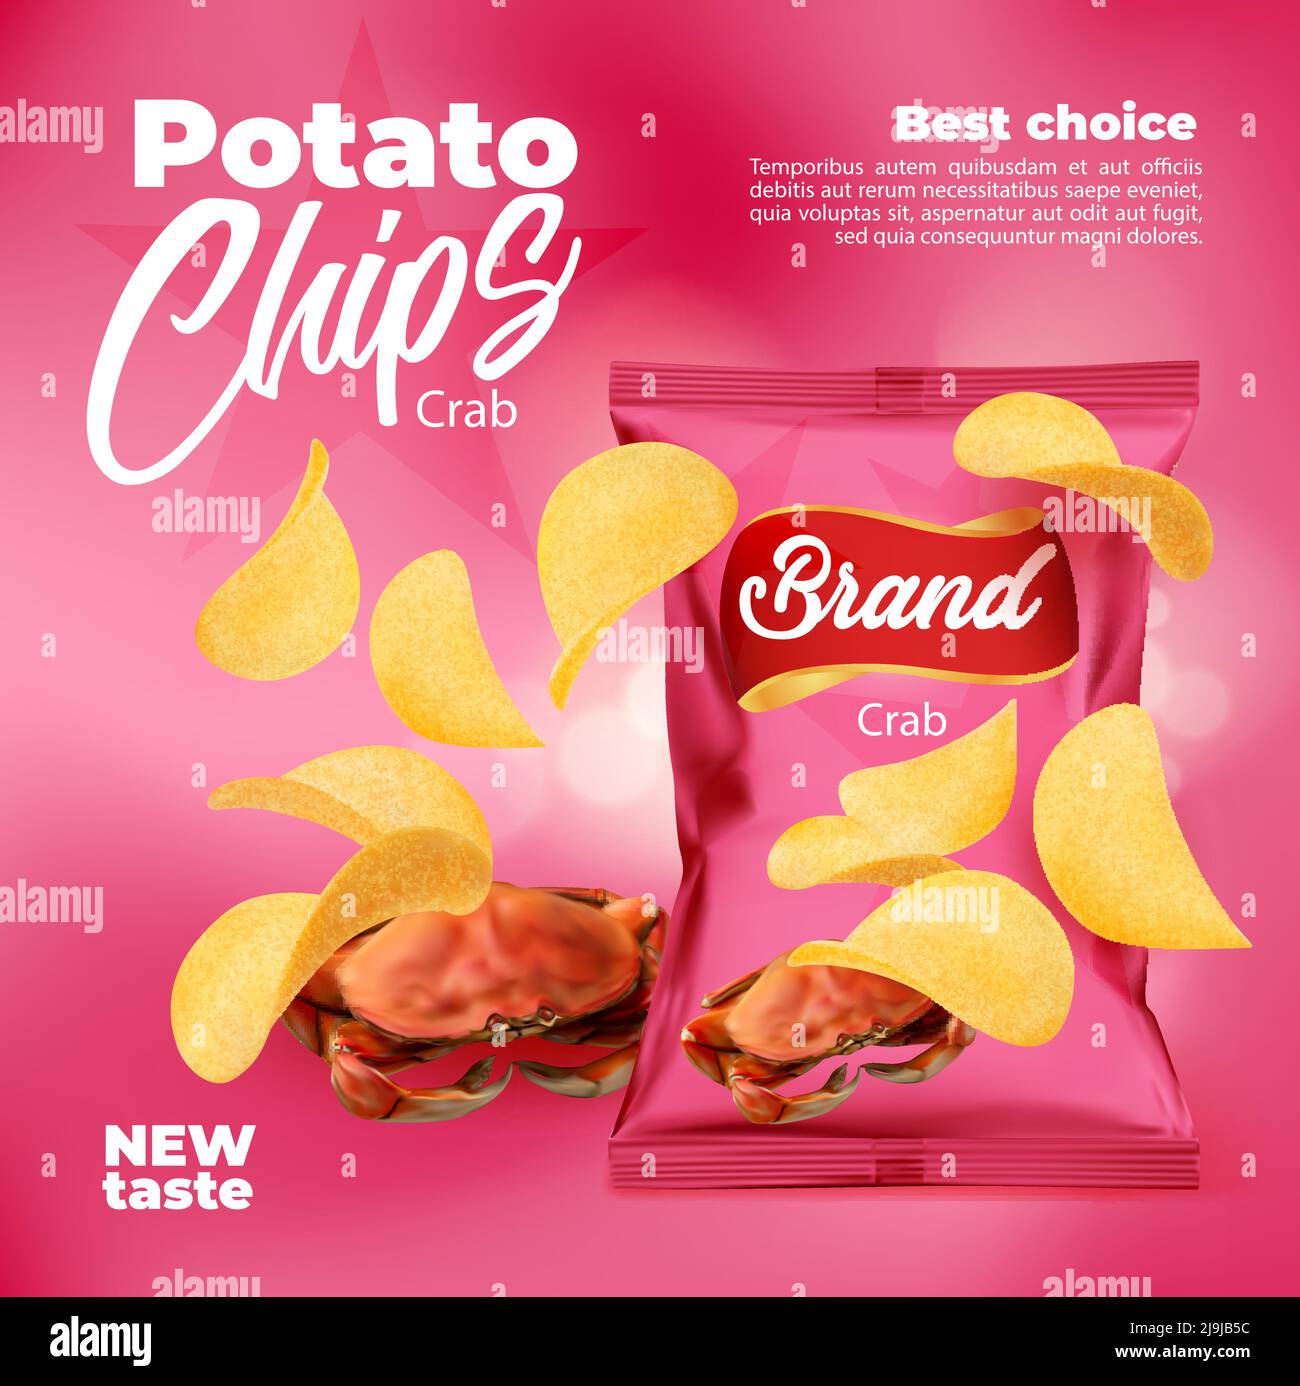 Realistic crab flavored potato chips snack food package. 3d vector promo  poster design with crunchy crispy